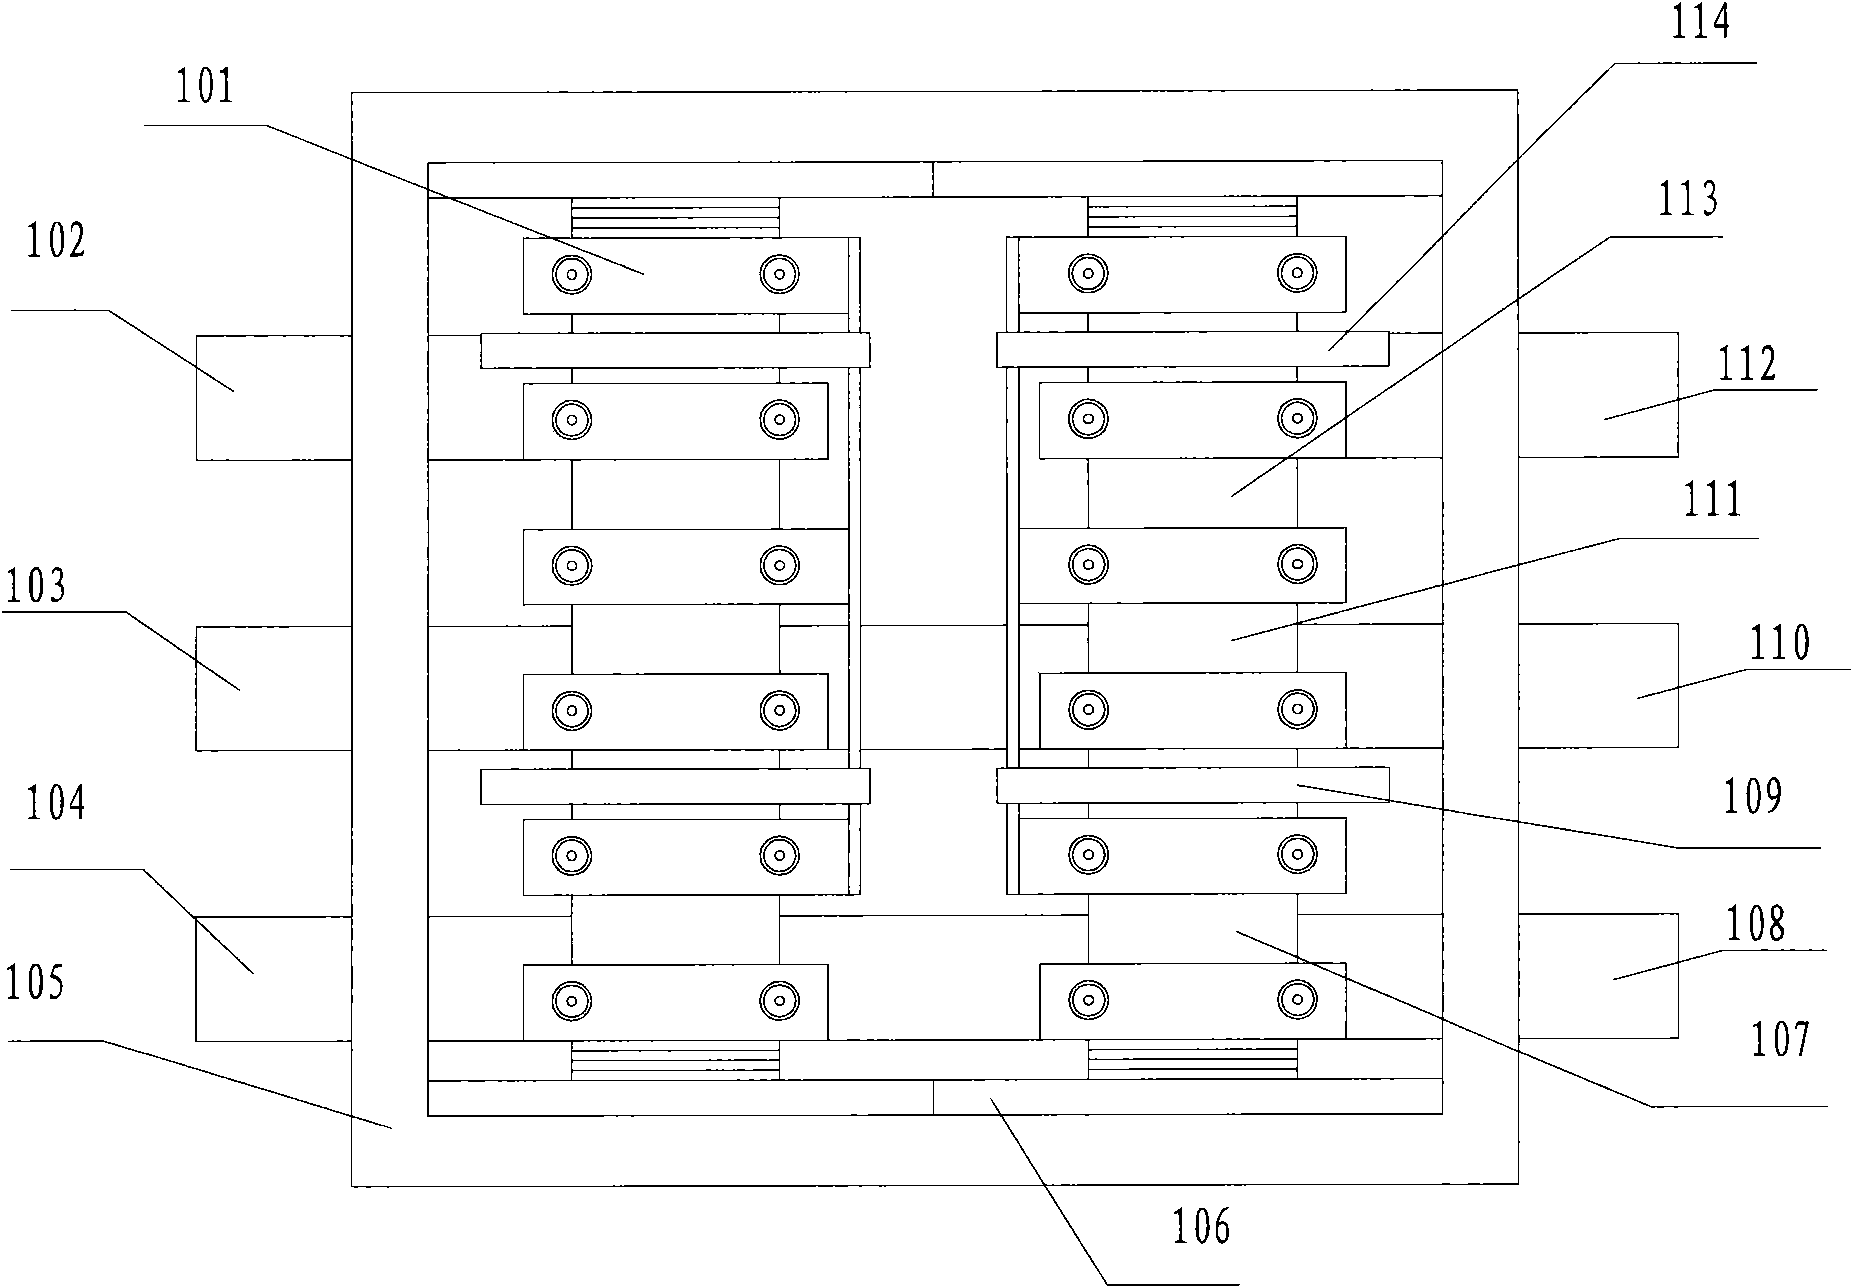 Phase module for three-level integrated gate-commutated thyristor frequency converter